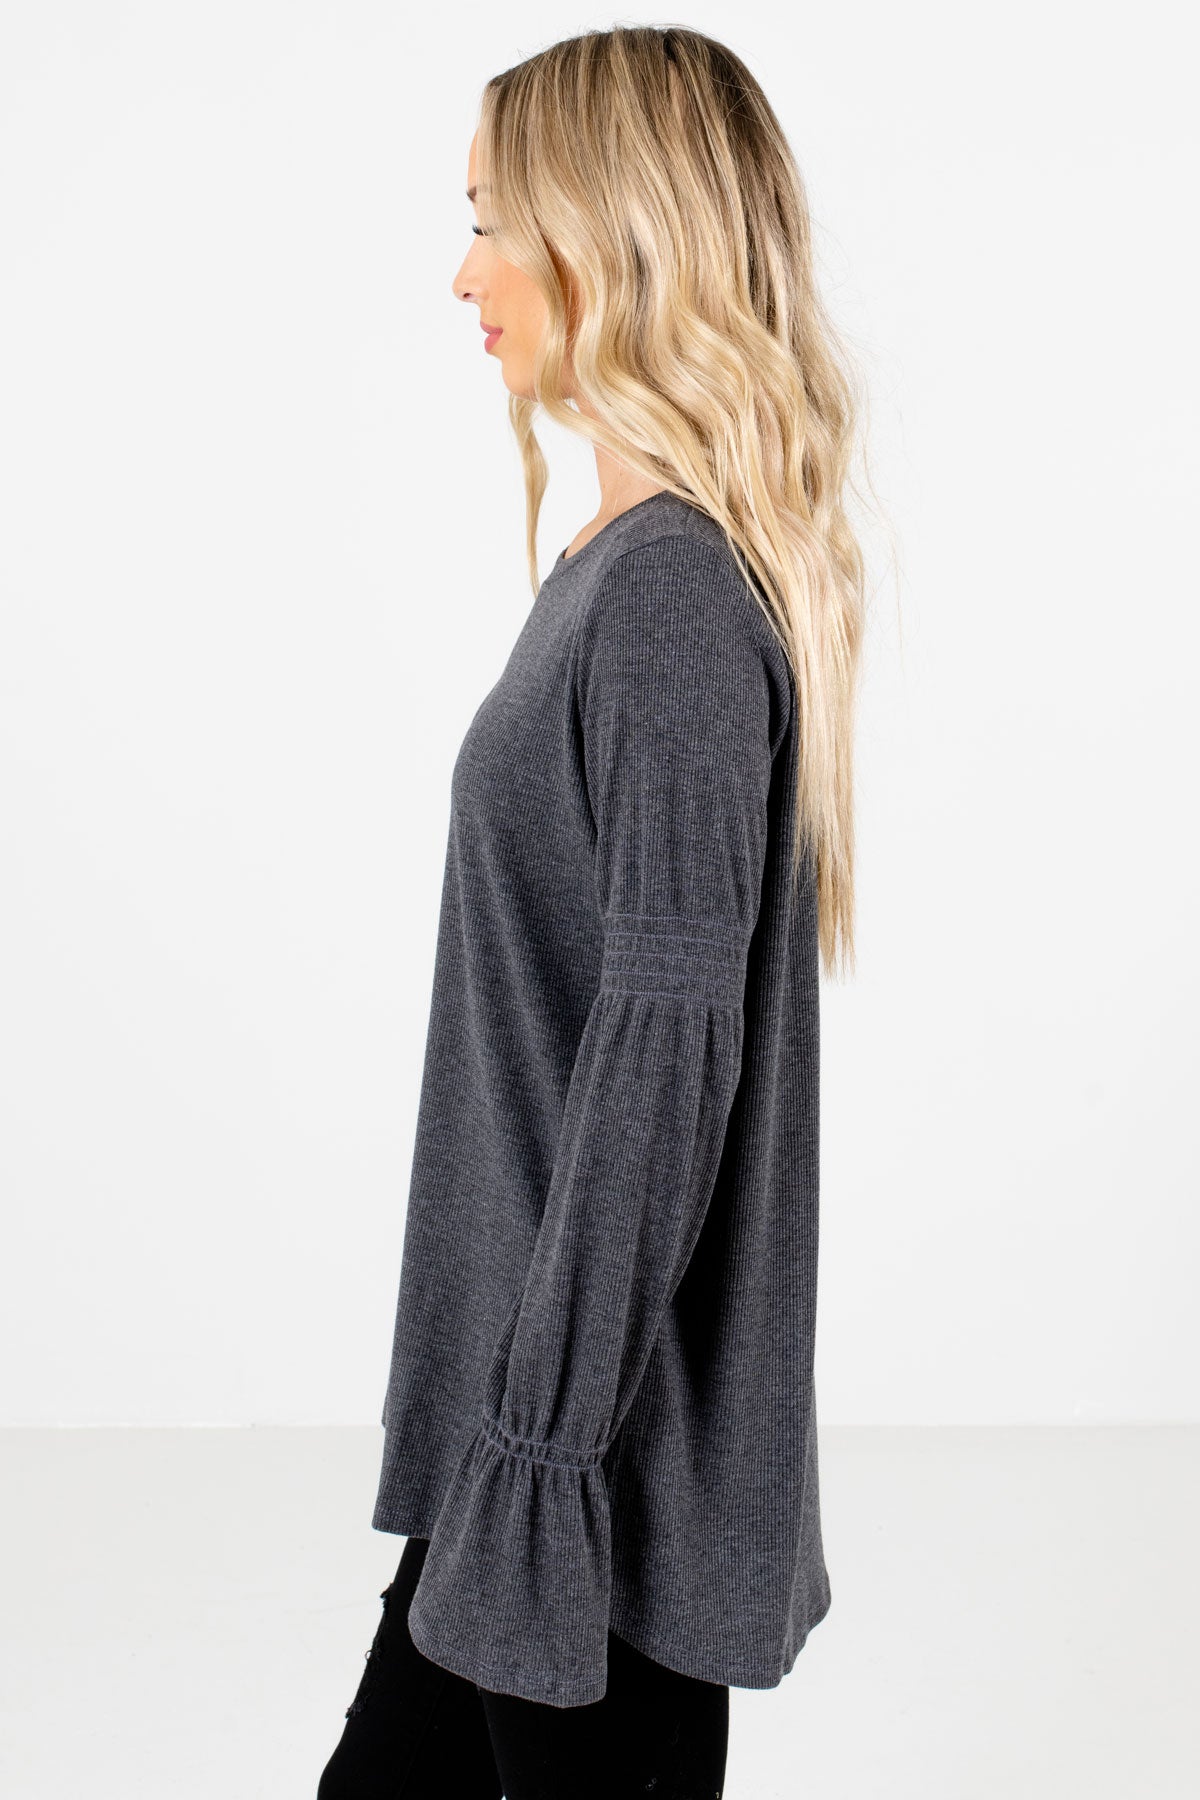 Charcoal Gray Round Neckline Boutique Tops for Women